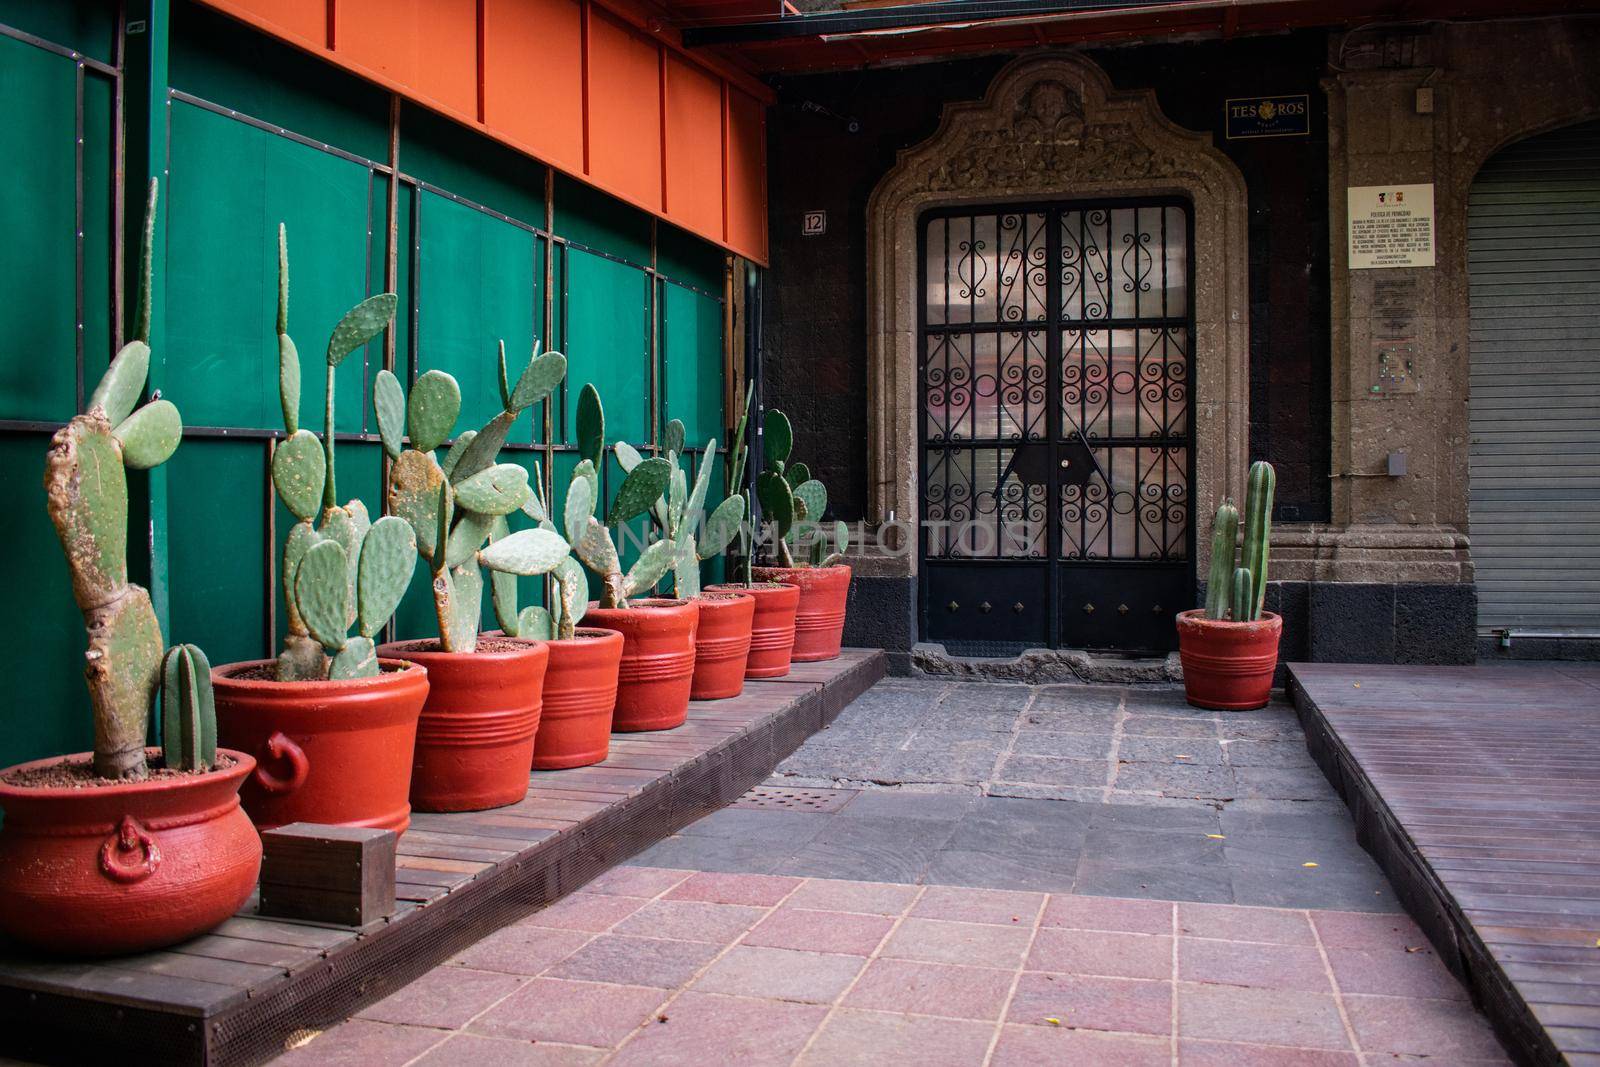 Row of nopales in brown pots on wooden floor and next to the entrance of an old building. Mexican spiky plants in clay pots next to green wall. Metal and glass door from classic building